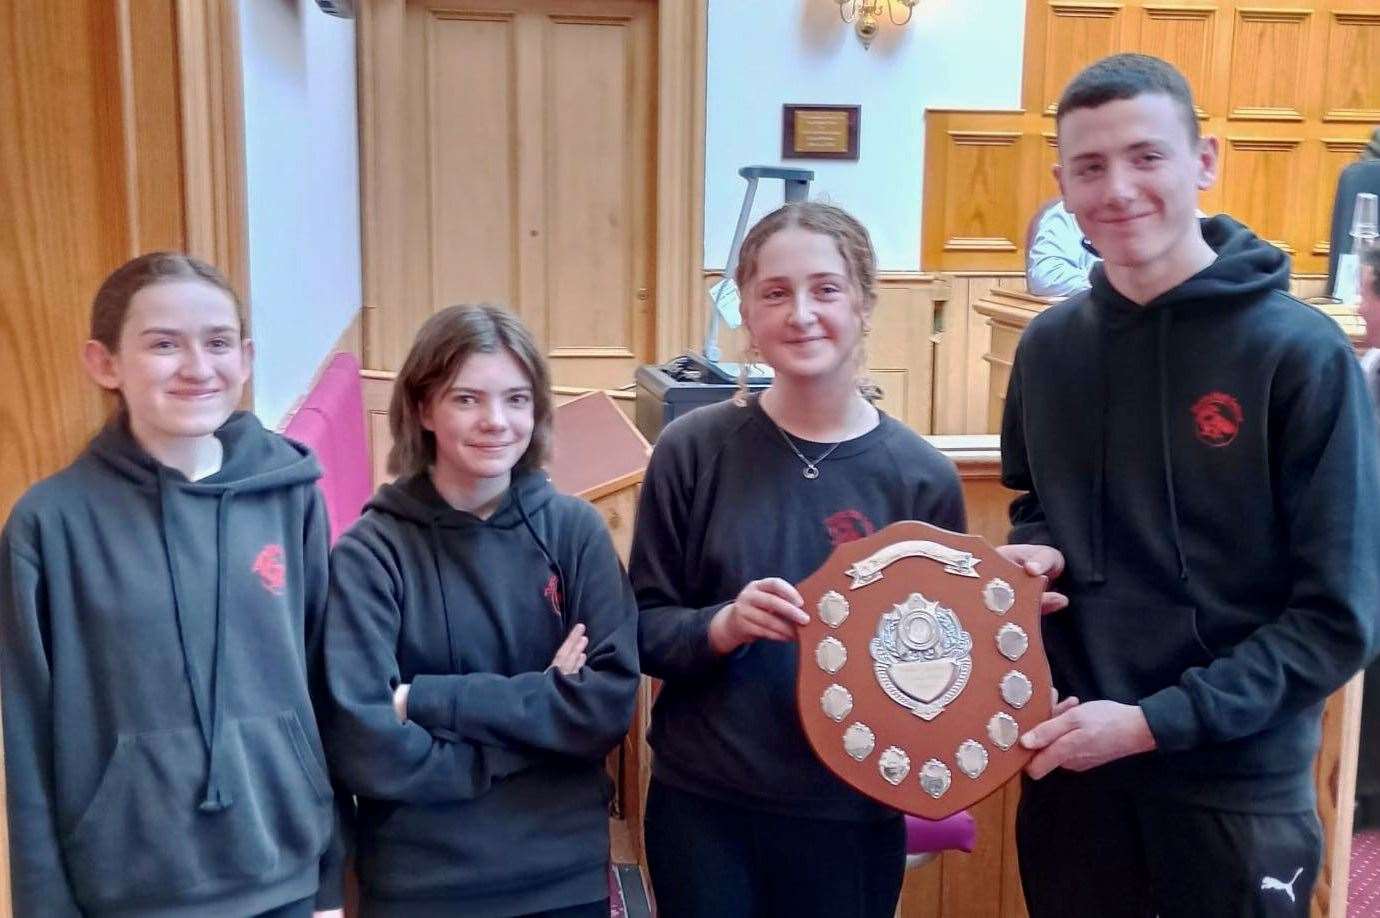 From left: Emily Wallace, Maree Ford and winners Ola Omand and Ellis Macdonald, all third-year pupils.